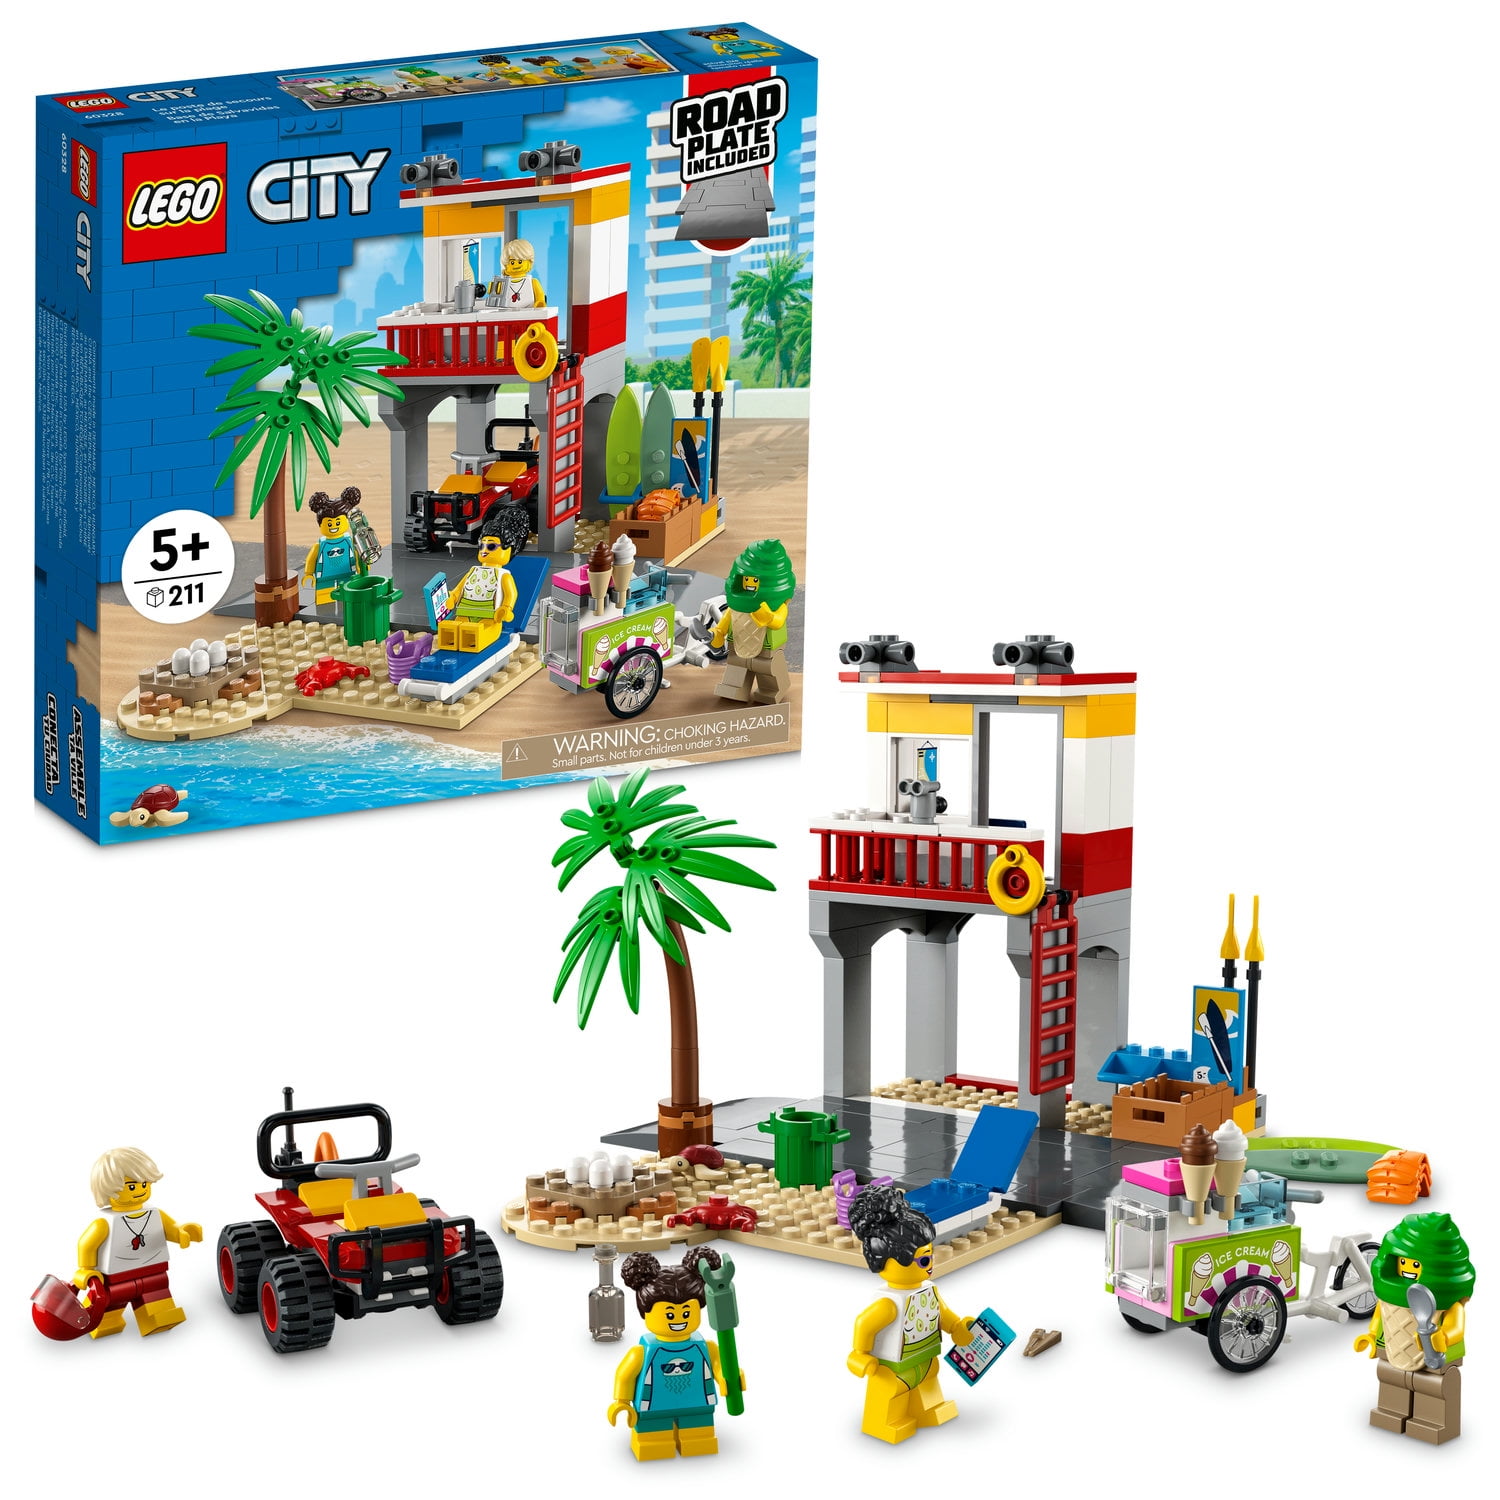 LEGO City Beach Lifeguard Station 60328 Building Kit for Ages 5+, with Minifigures and Crab and Turtle Figures (211 Pieces) - Walmart.com